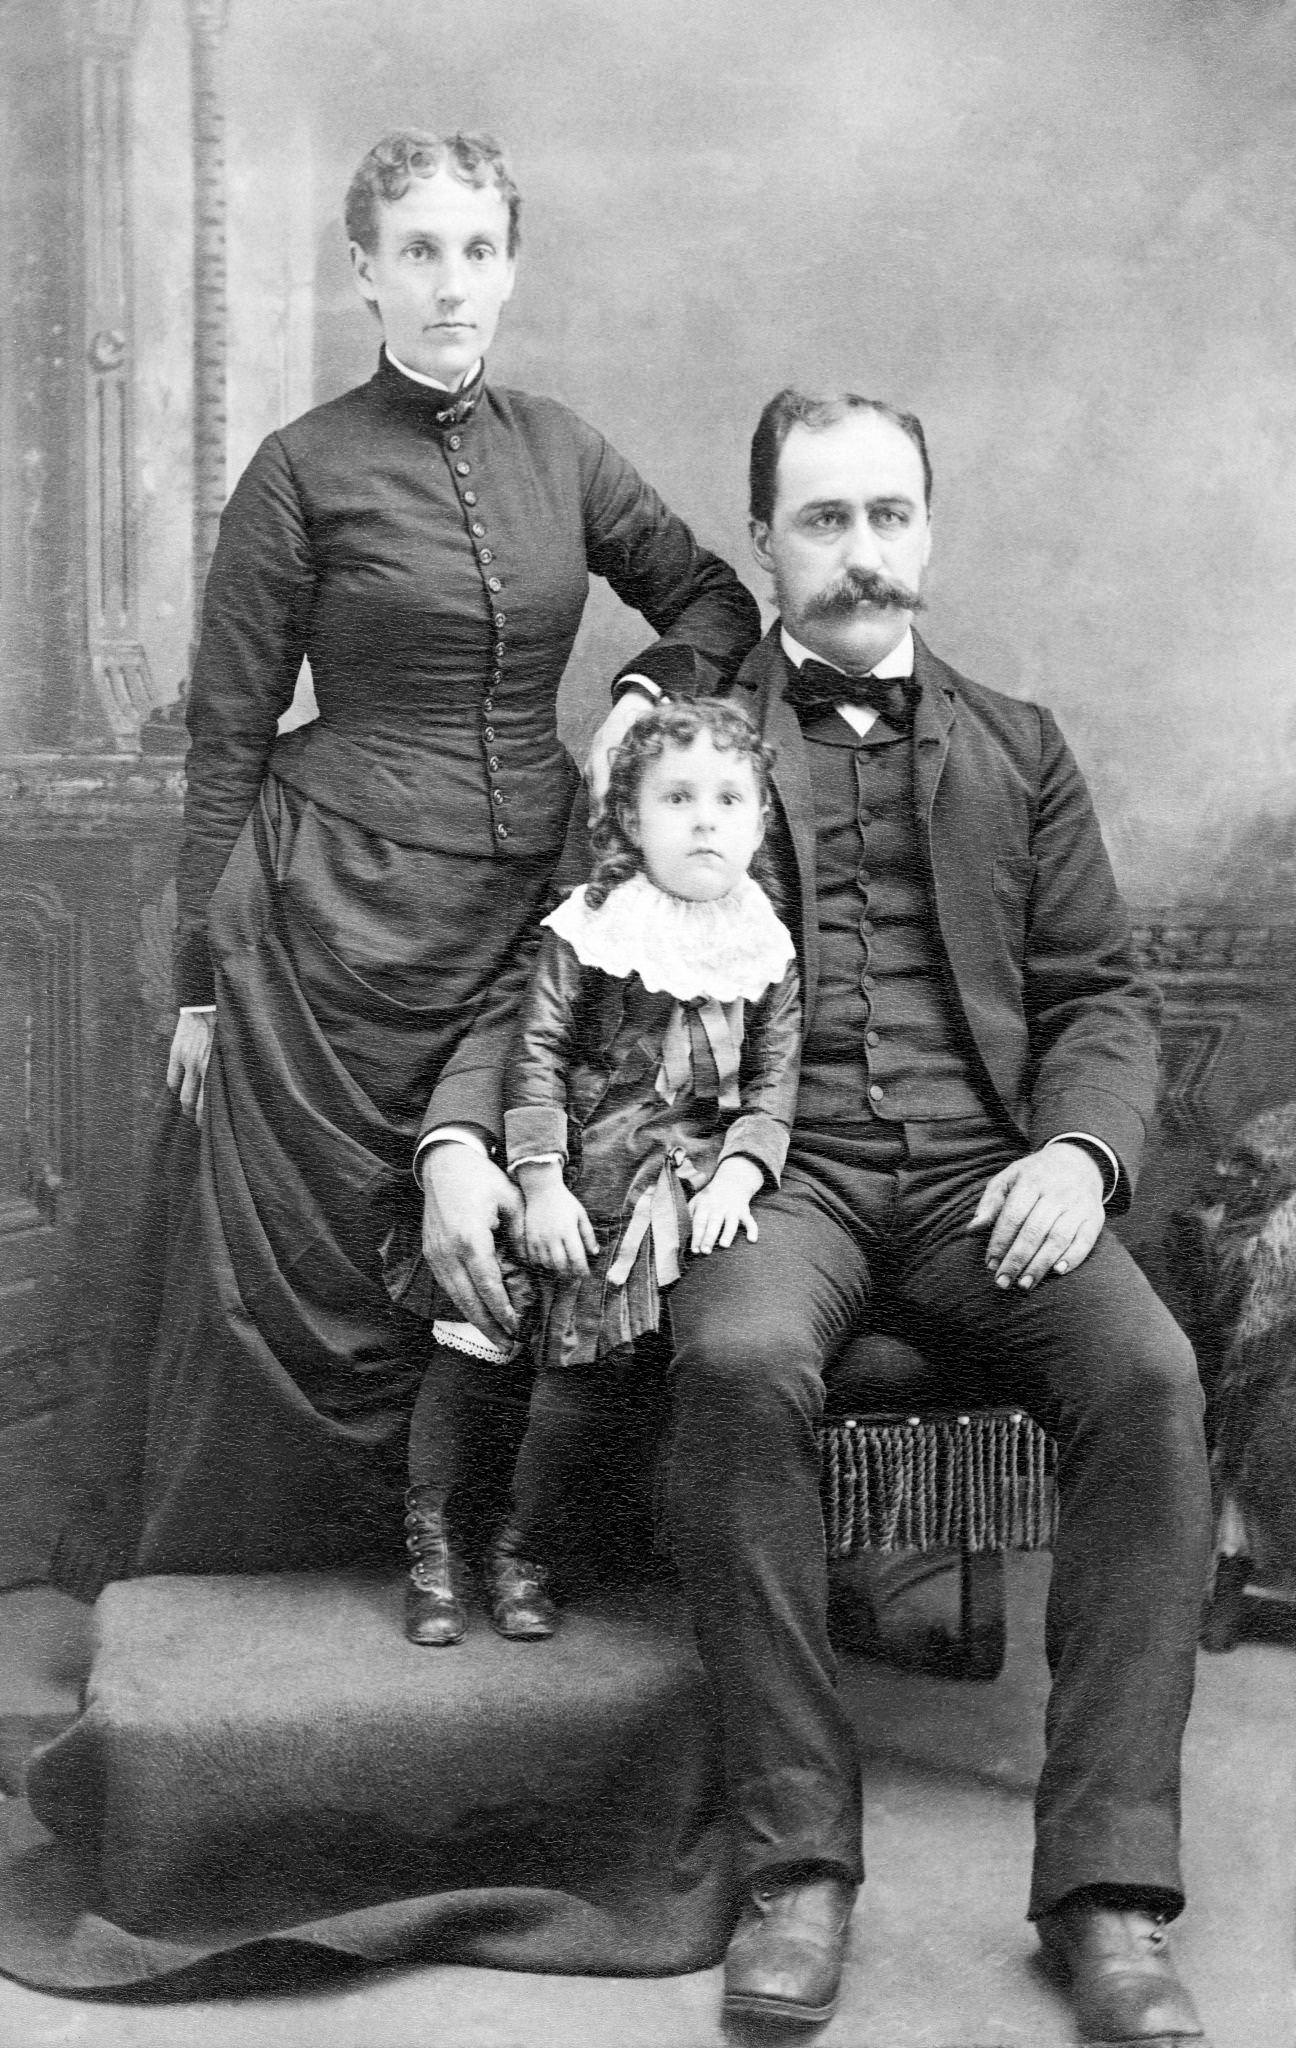 Victorian family with a child in a studio portrait, 1890s.